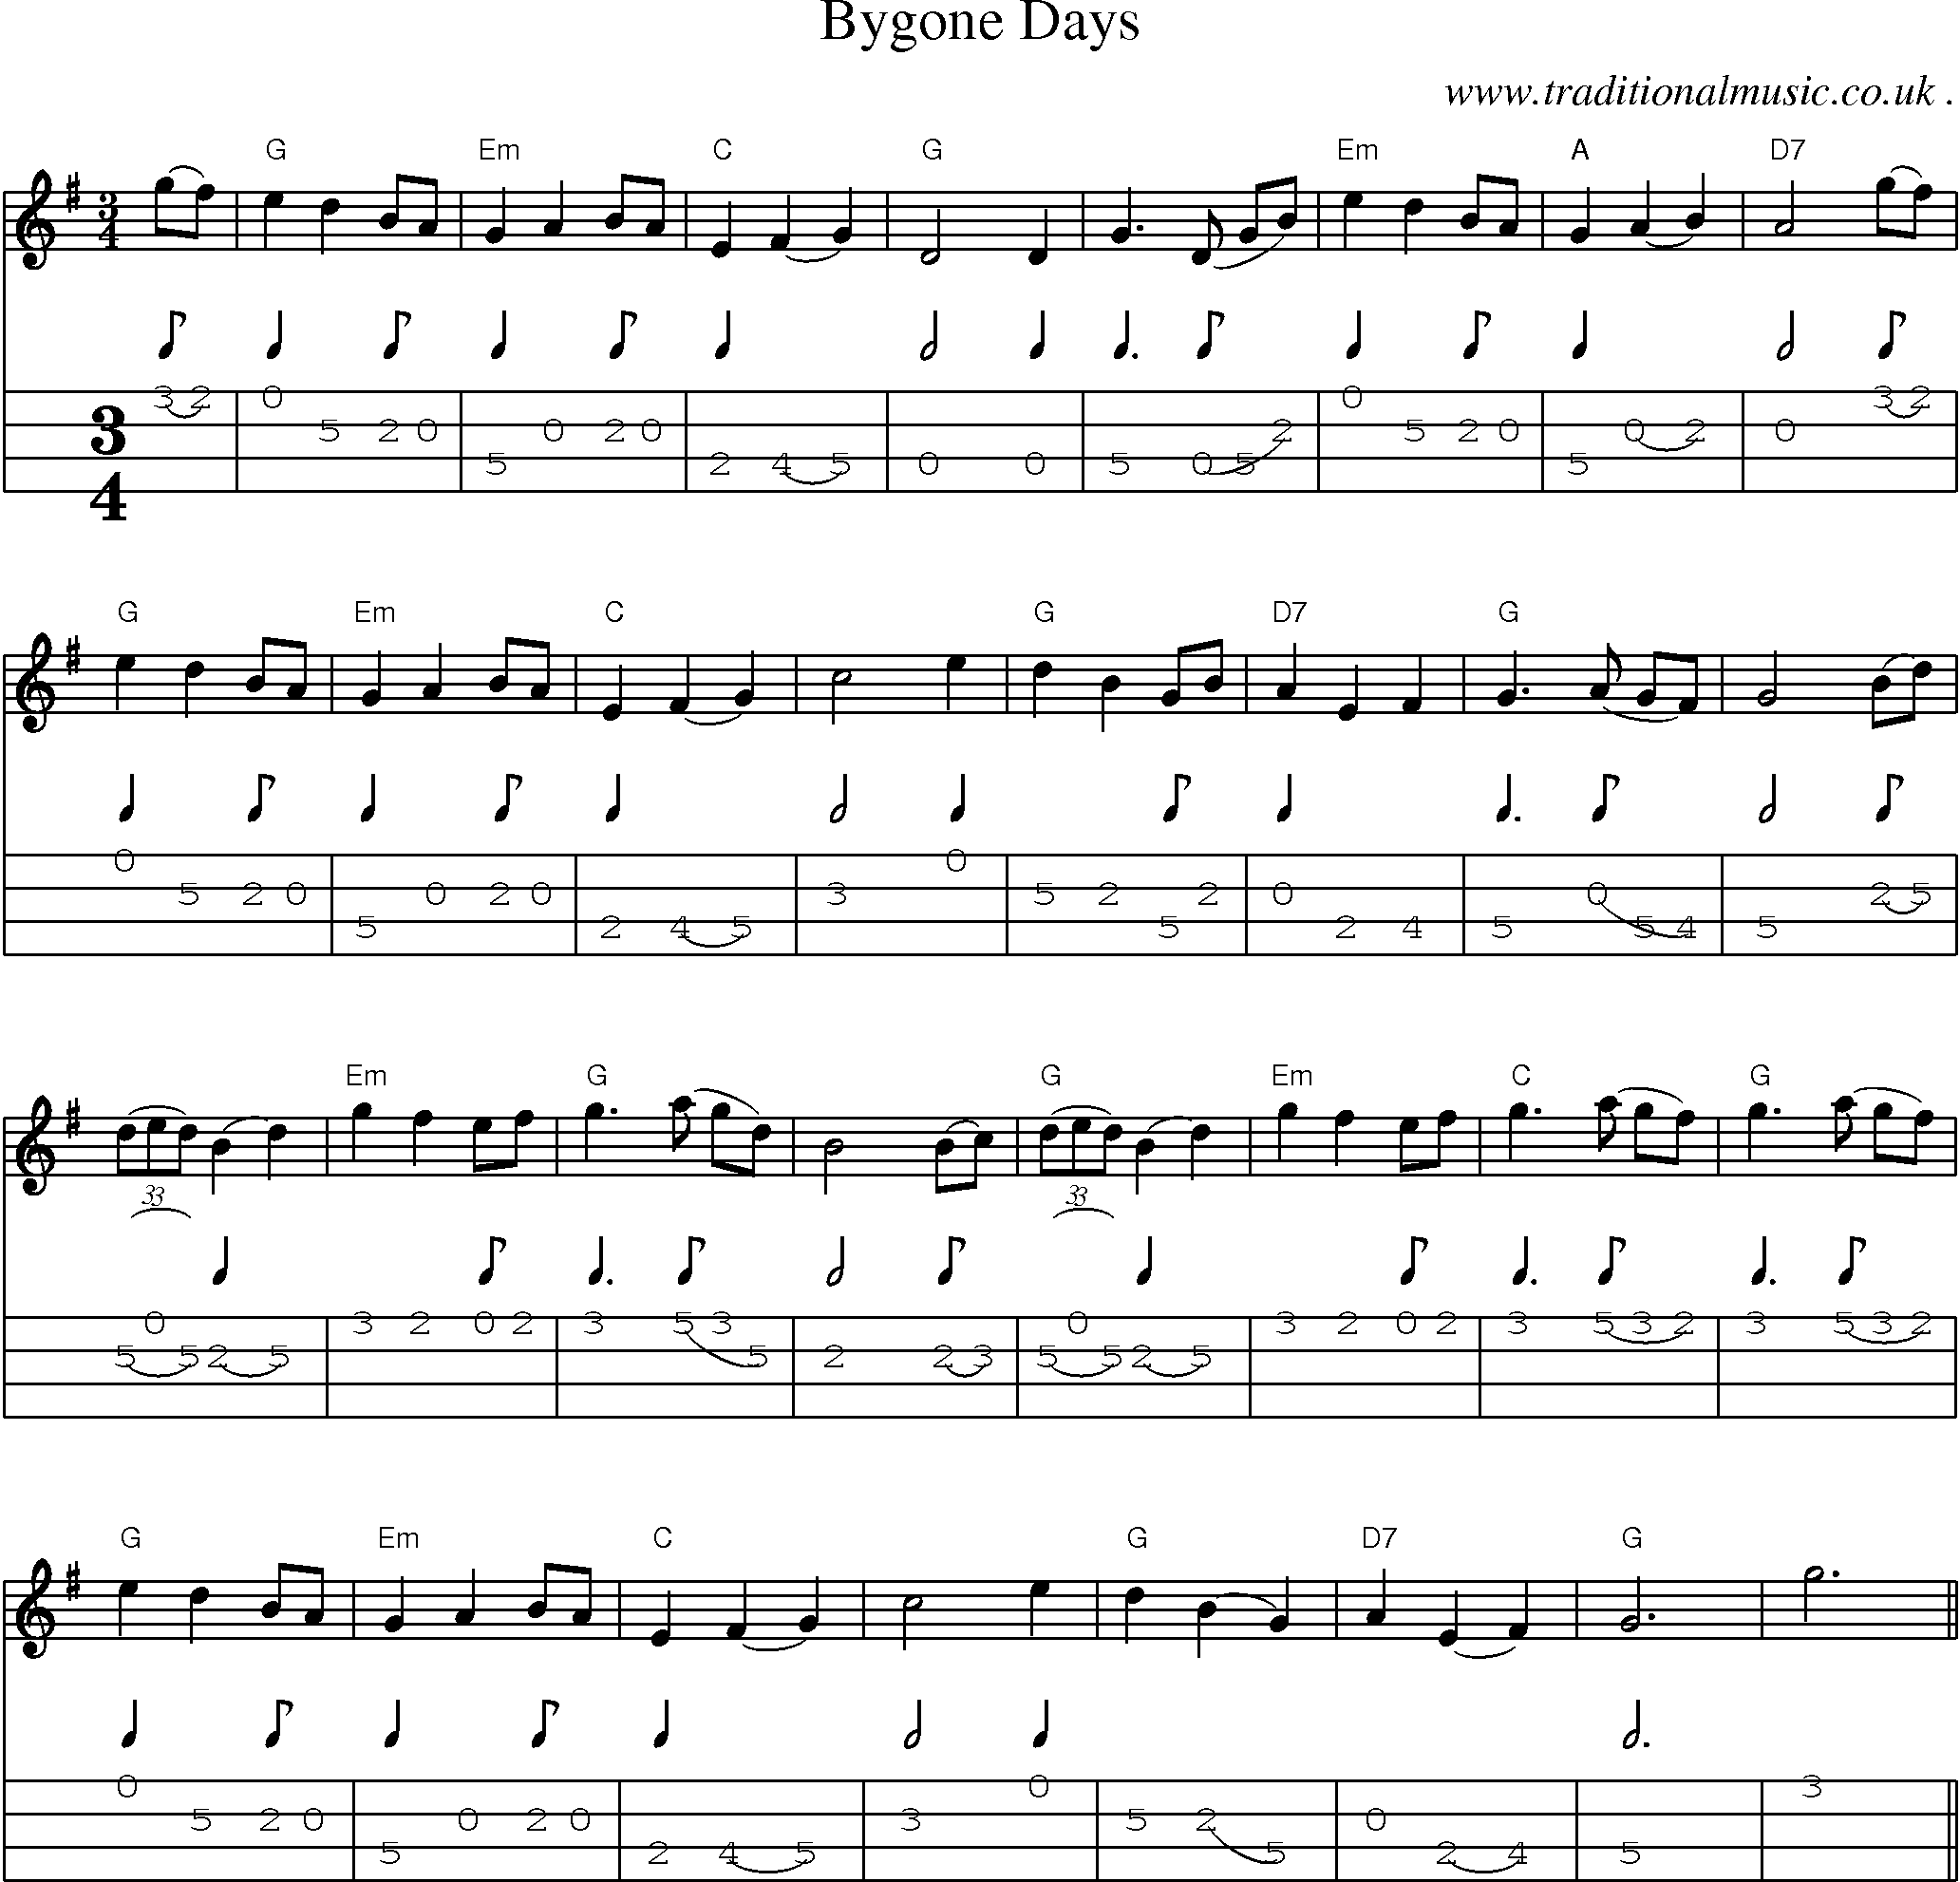 Music Score and Mandolin Tabs for Bygone Days